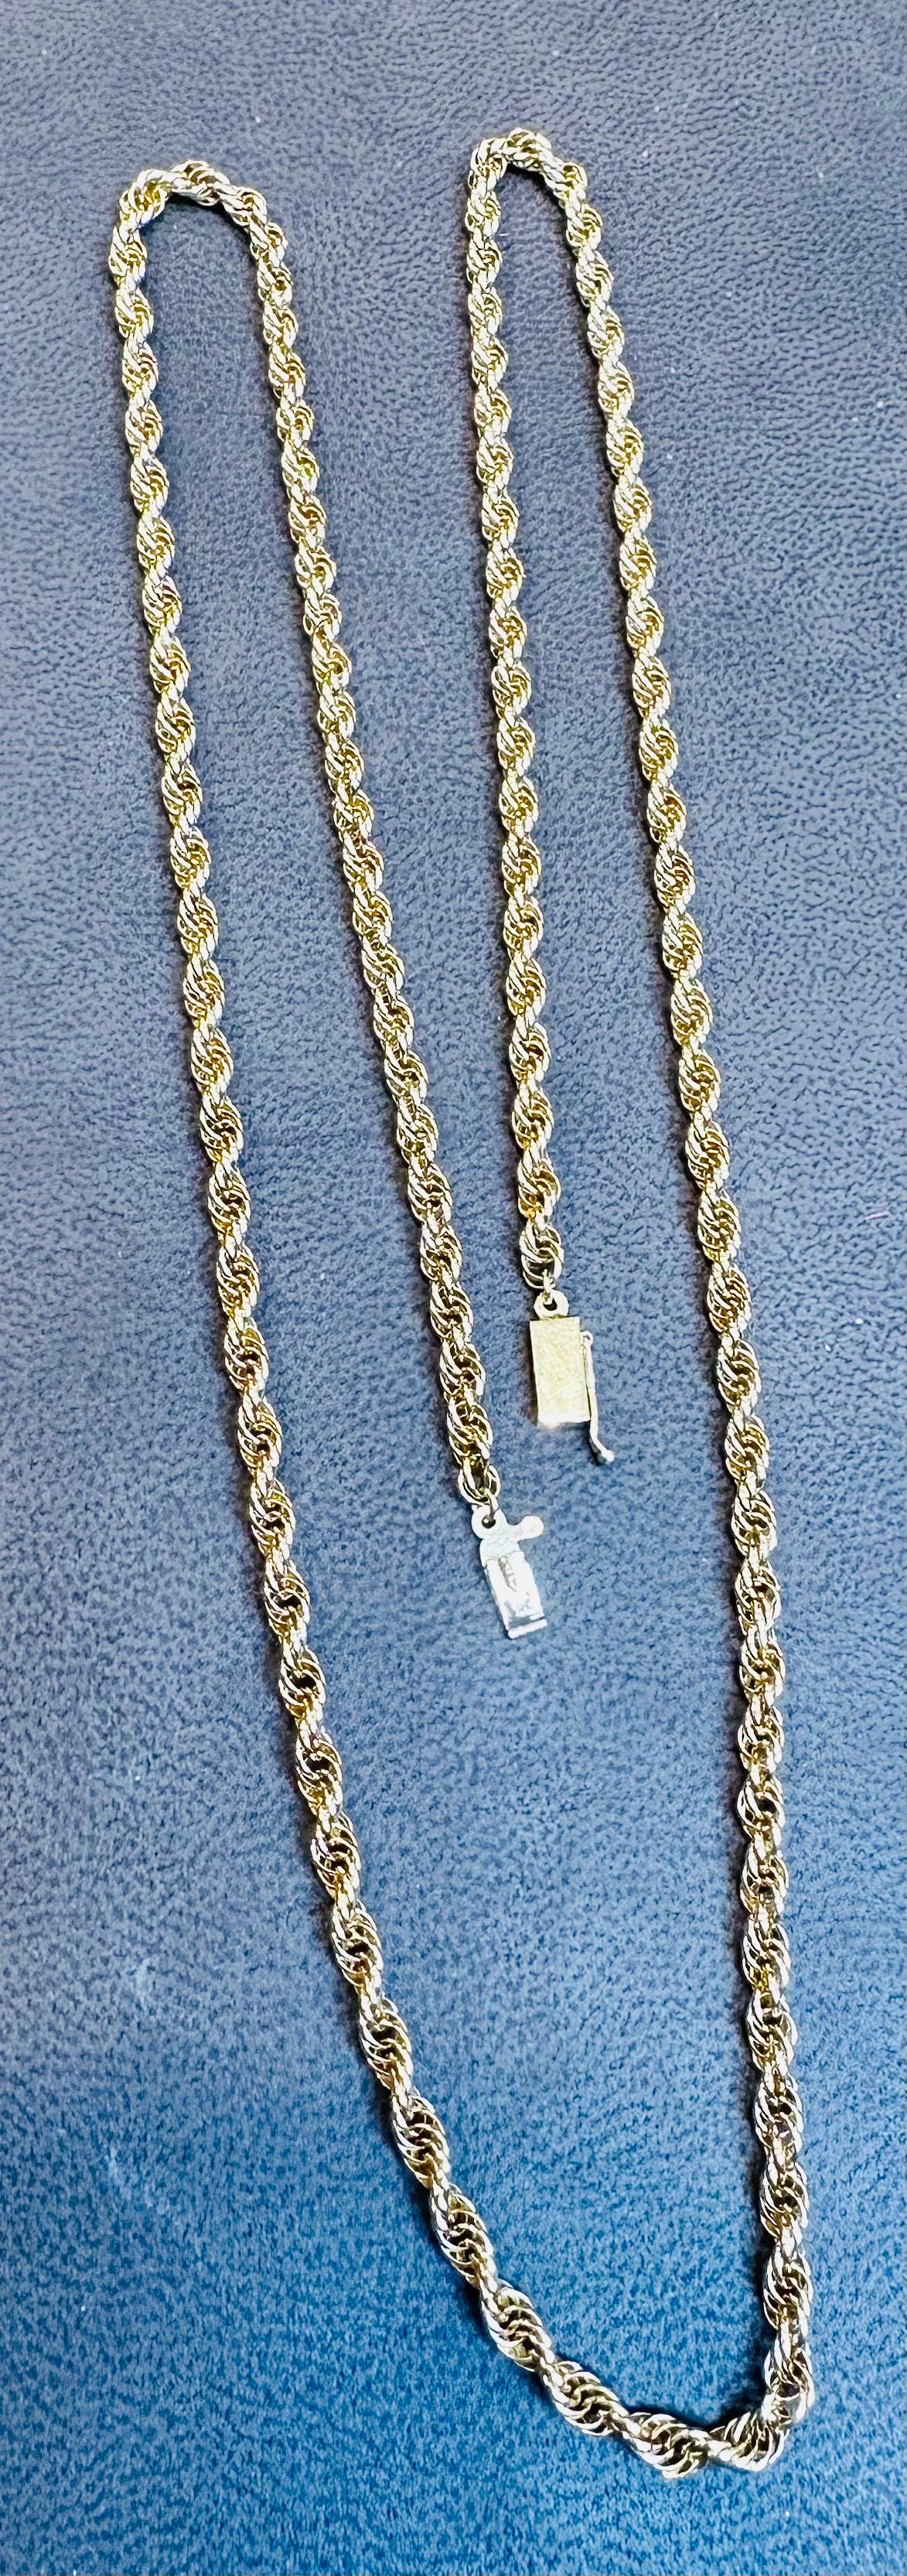 Vintage 14 Karat Yellow Gold 20.5 Gm, Rope Chain Necklace For Sale 3